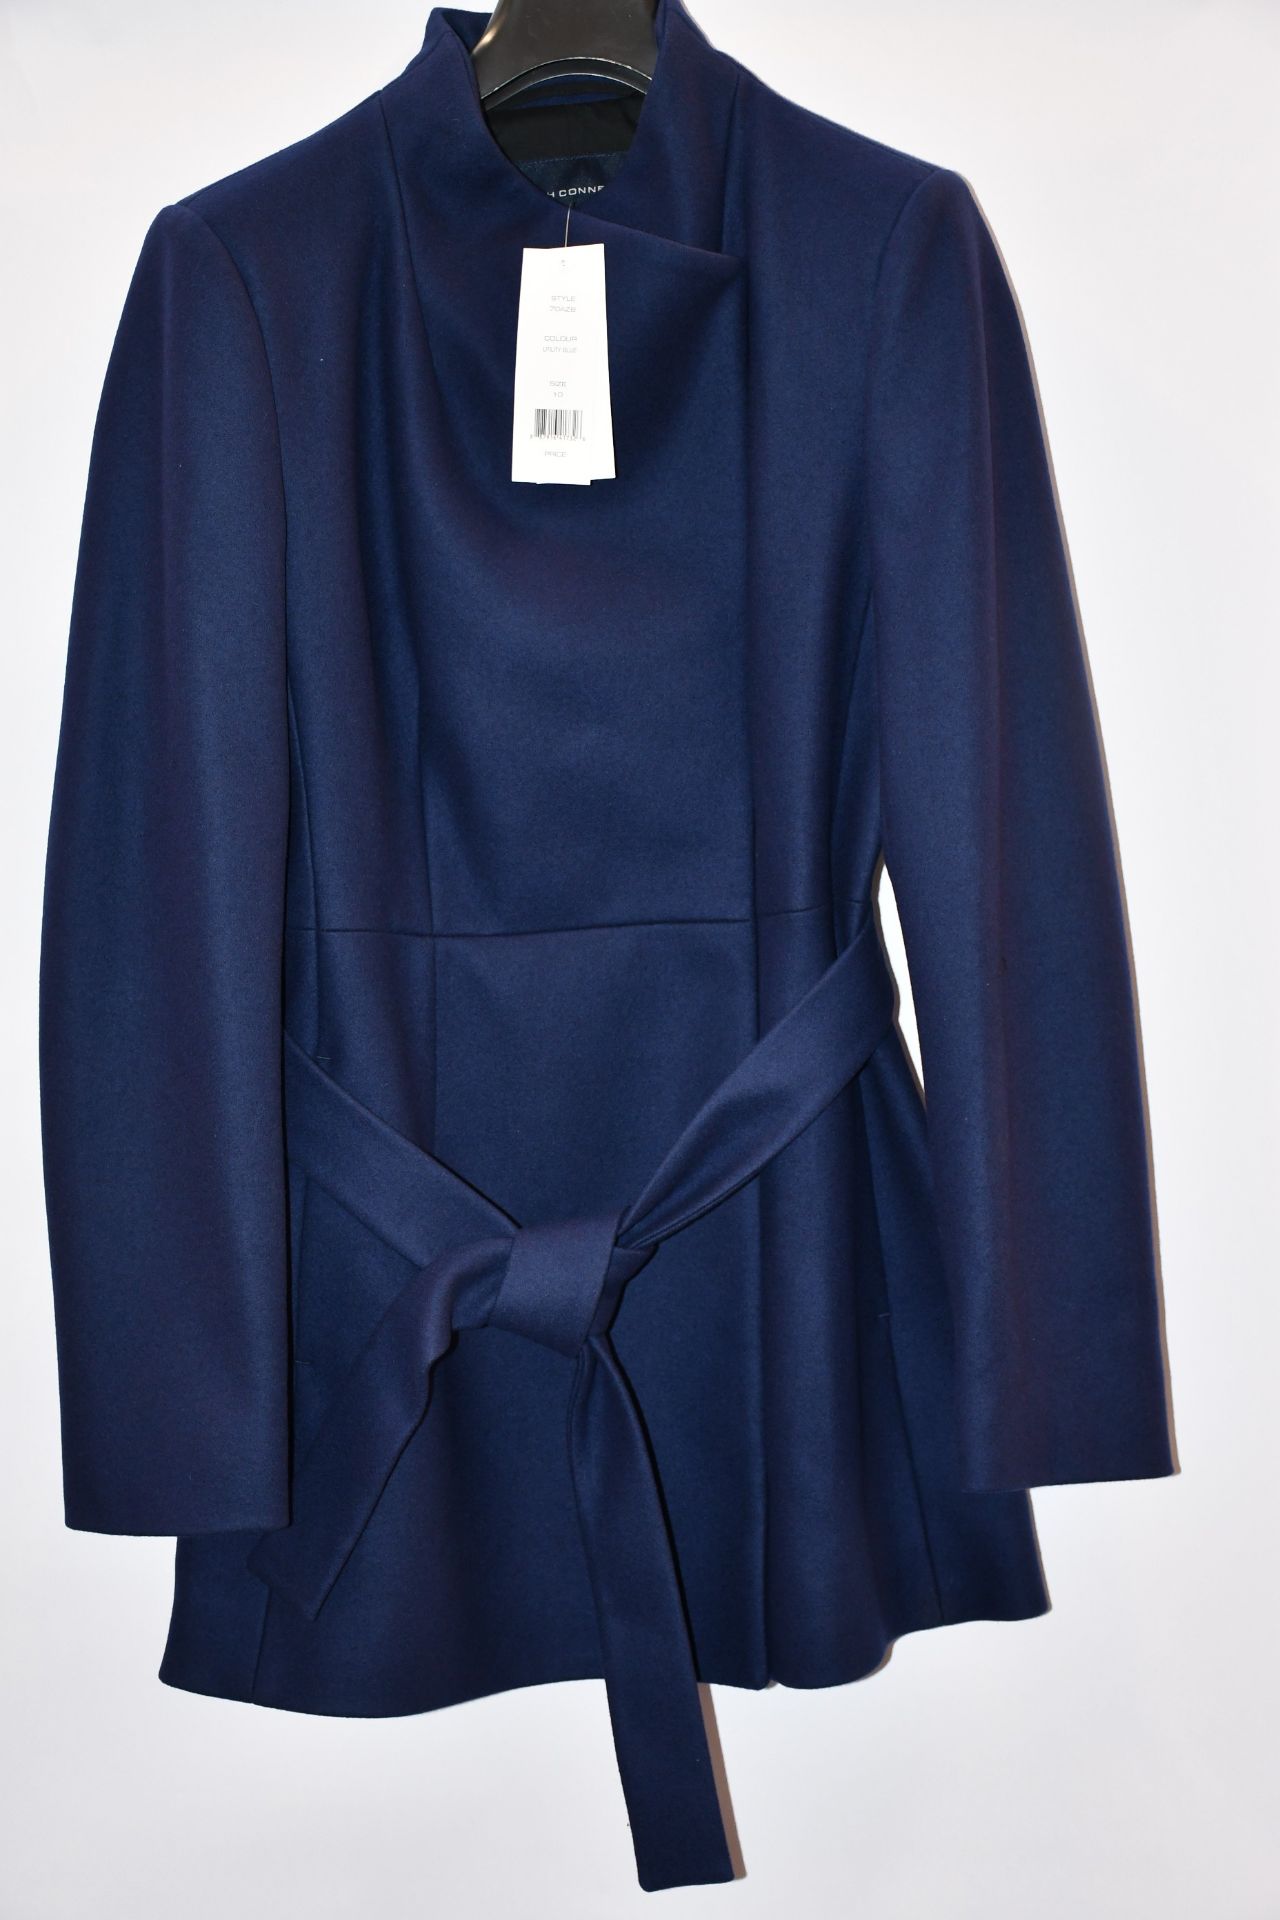 Two as new French Connection platform felt crossover coats (1 x size 10, 1 x size 12 - RRP £190